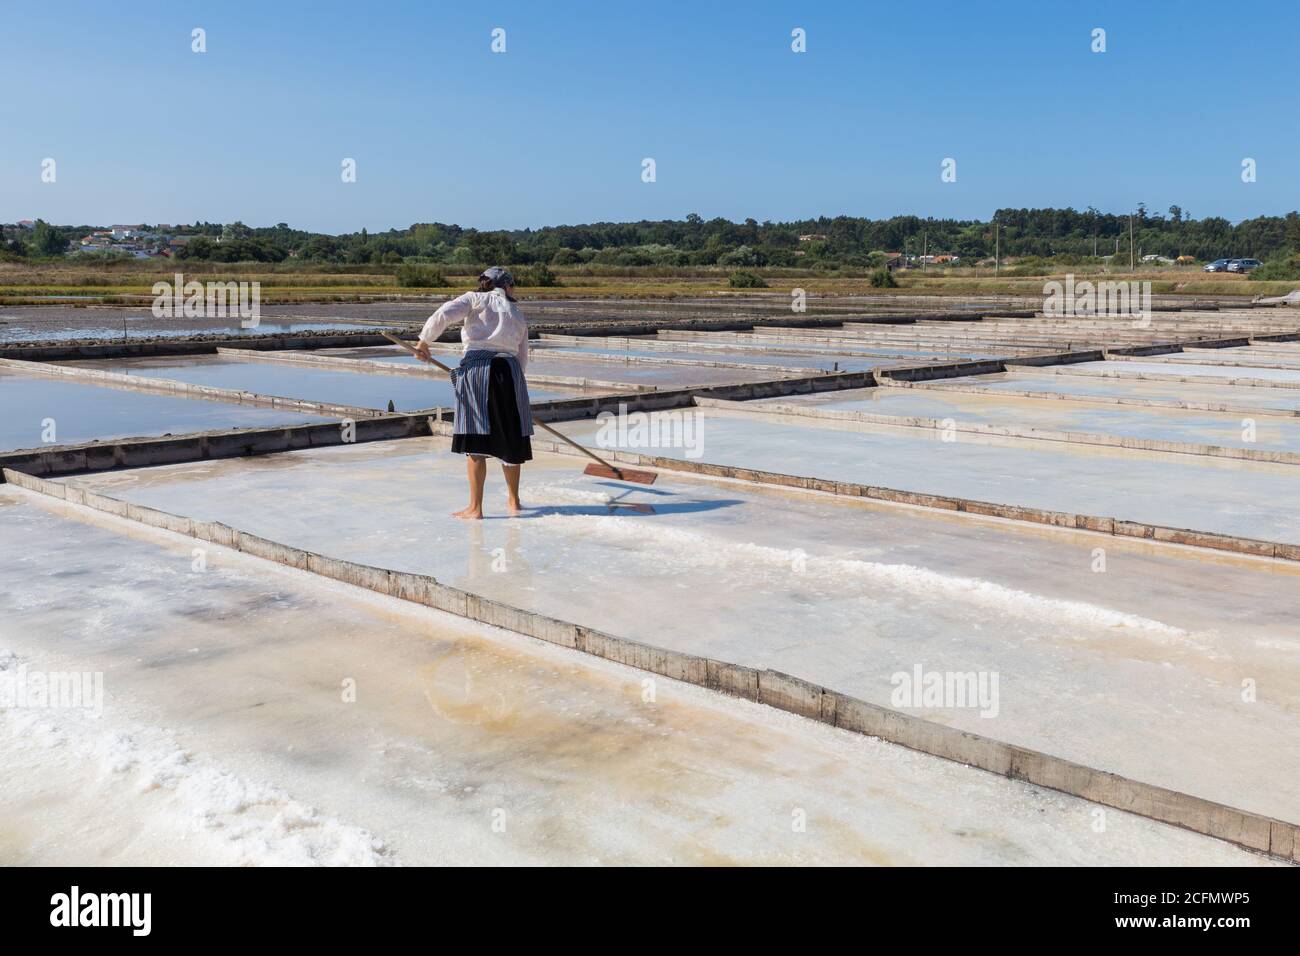 Woman working in traditional salt extraction in Figueira da Foz, Portugal Stock Photo